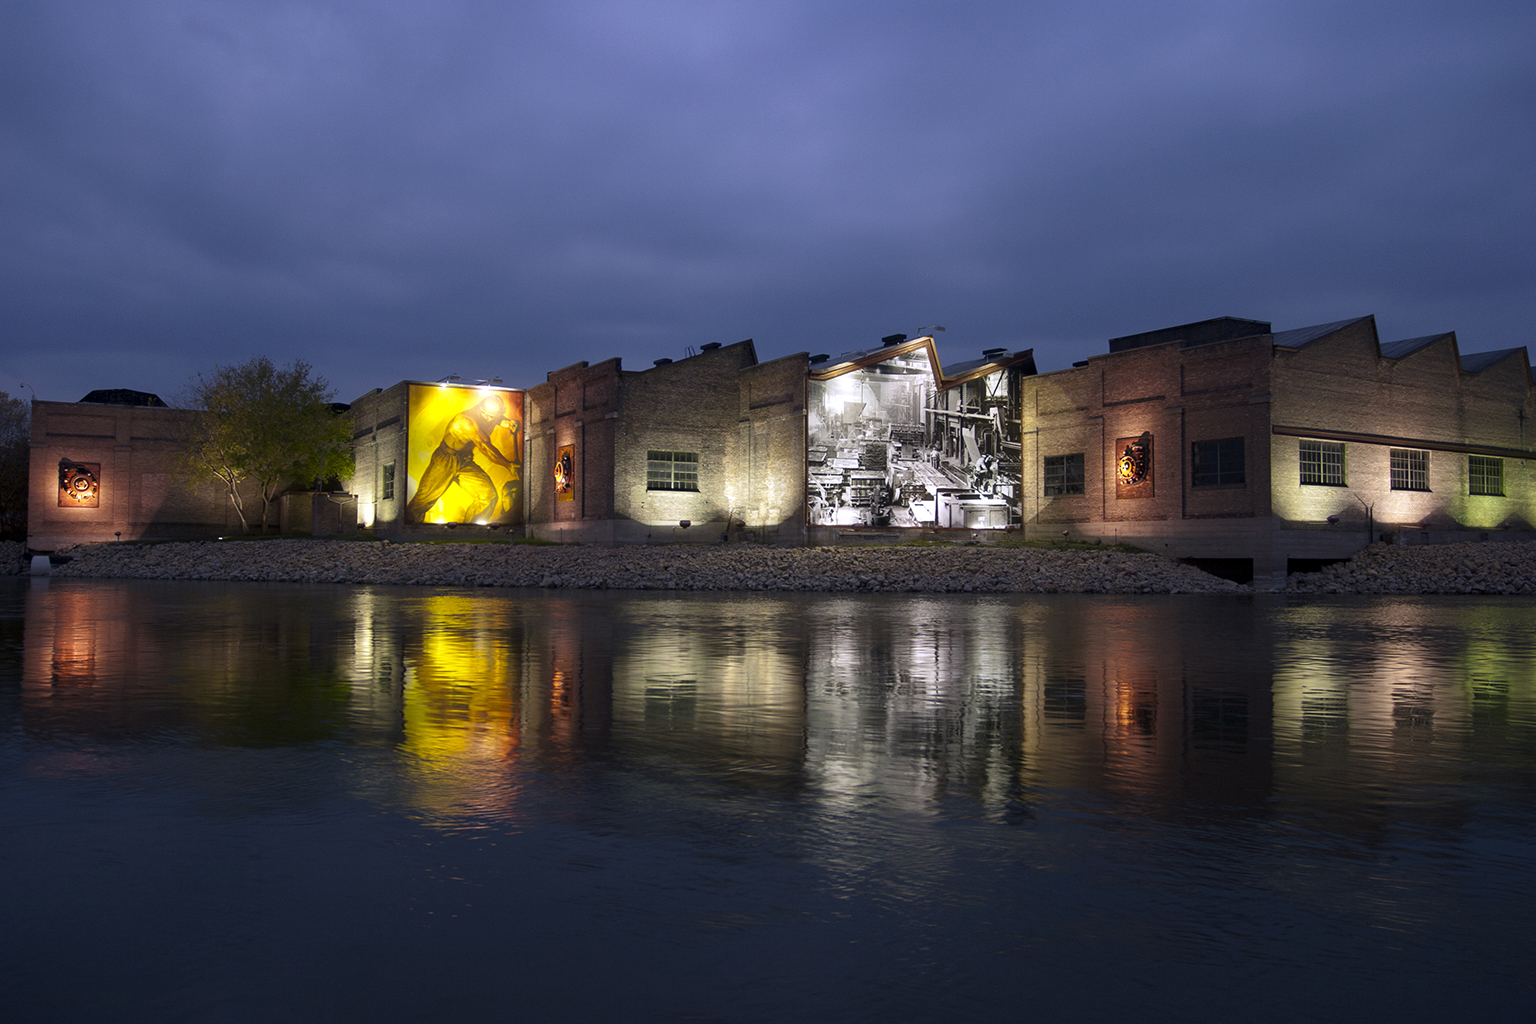 Buildings with murals are lit up at night with their mirror images shimmering in the water.